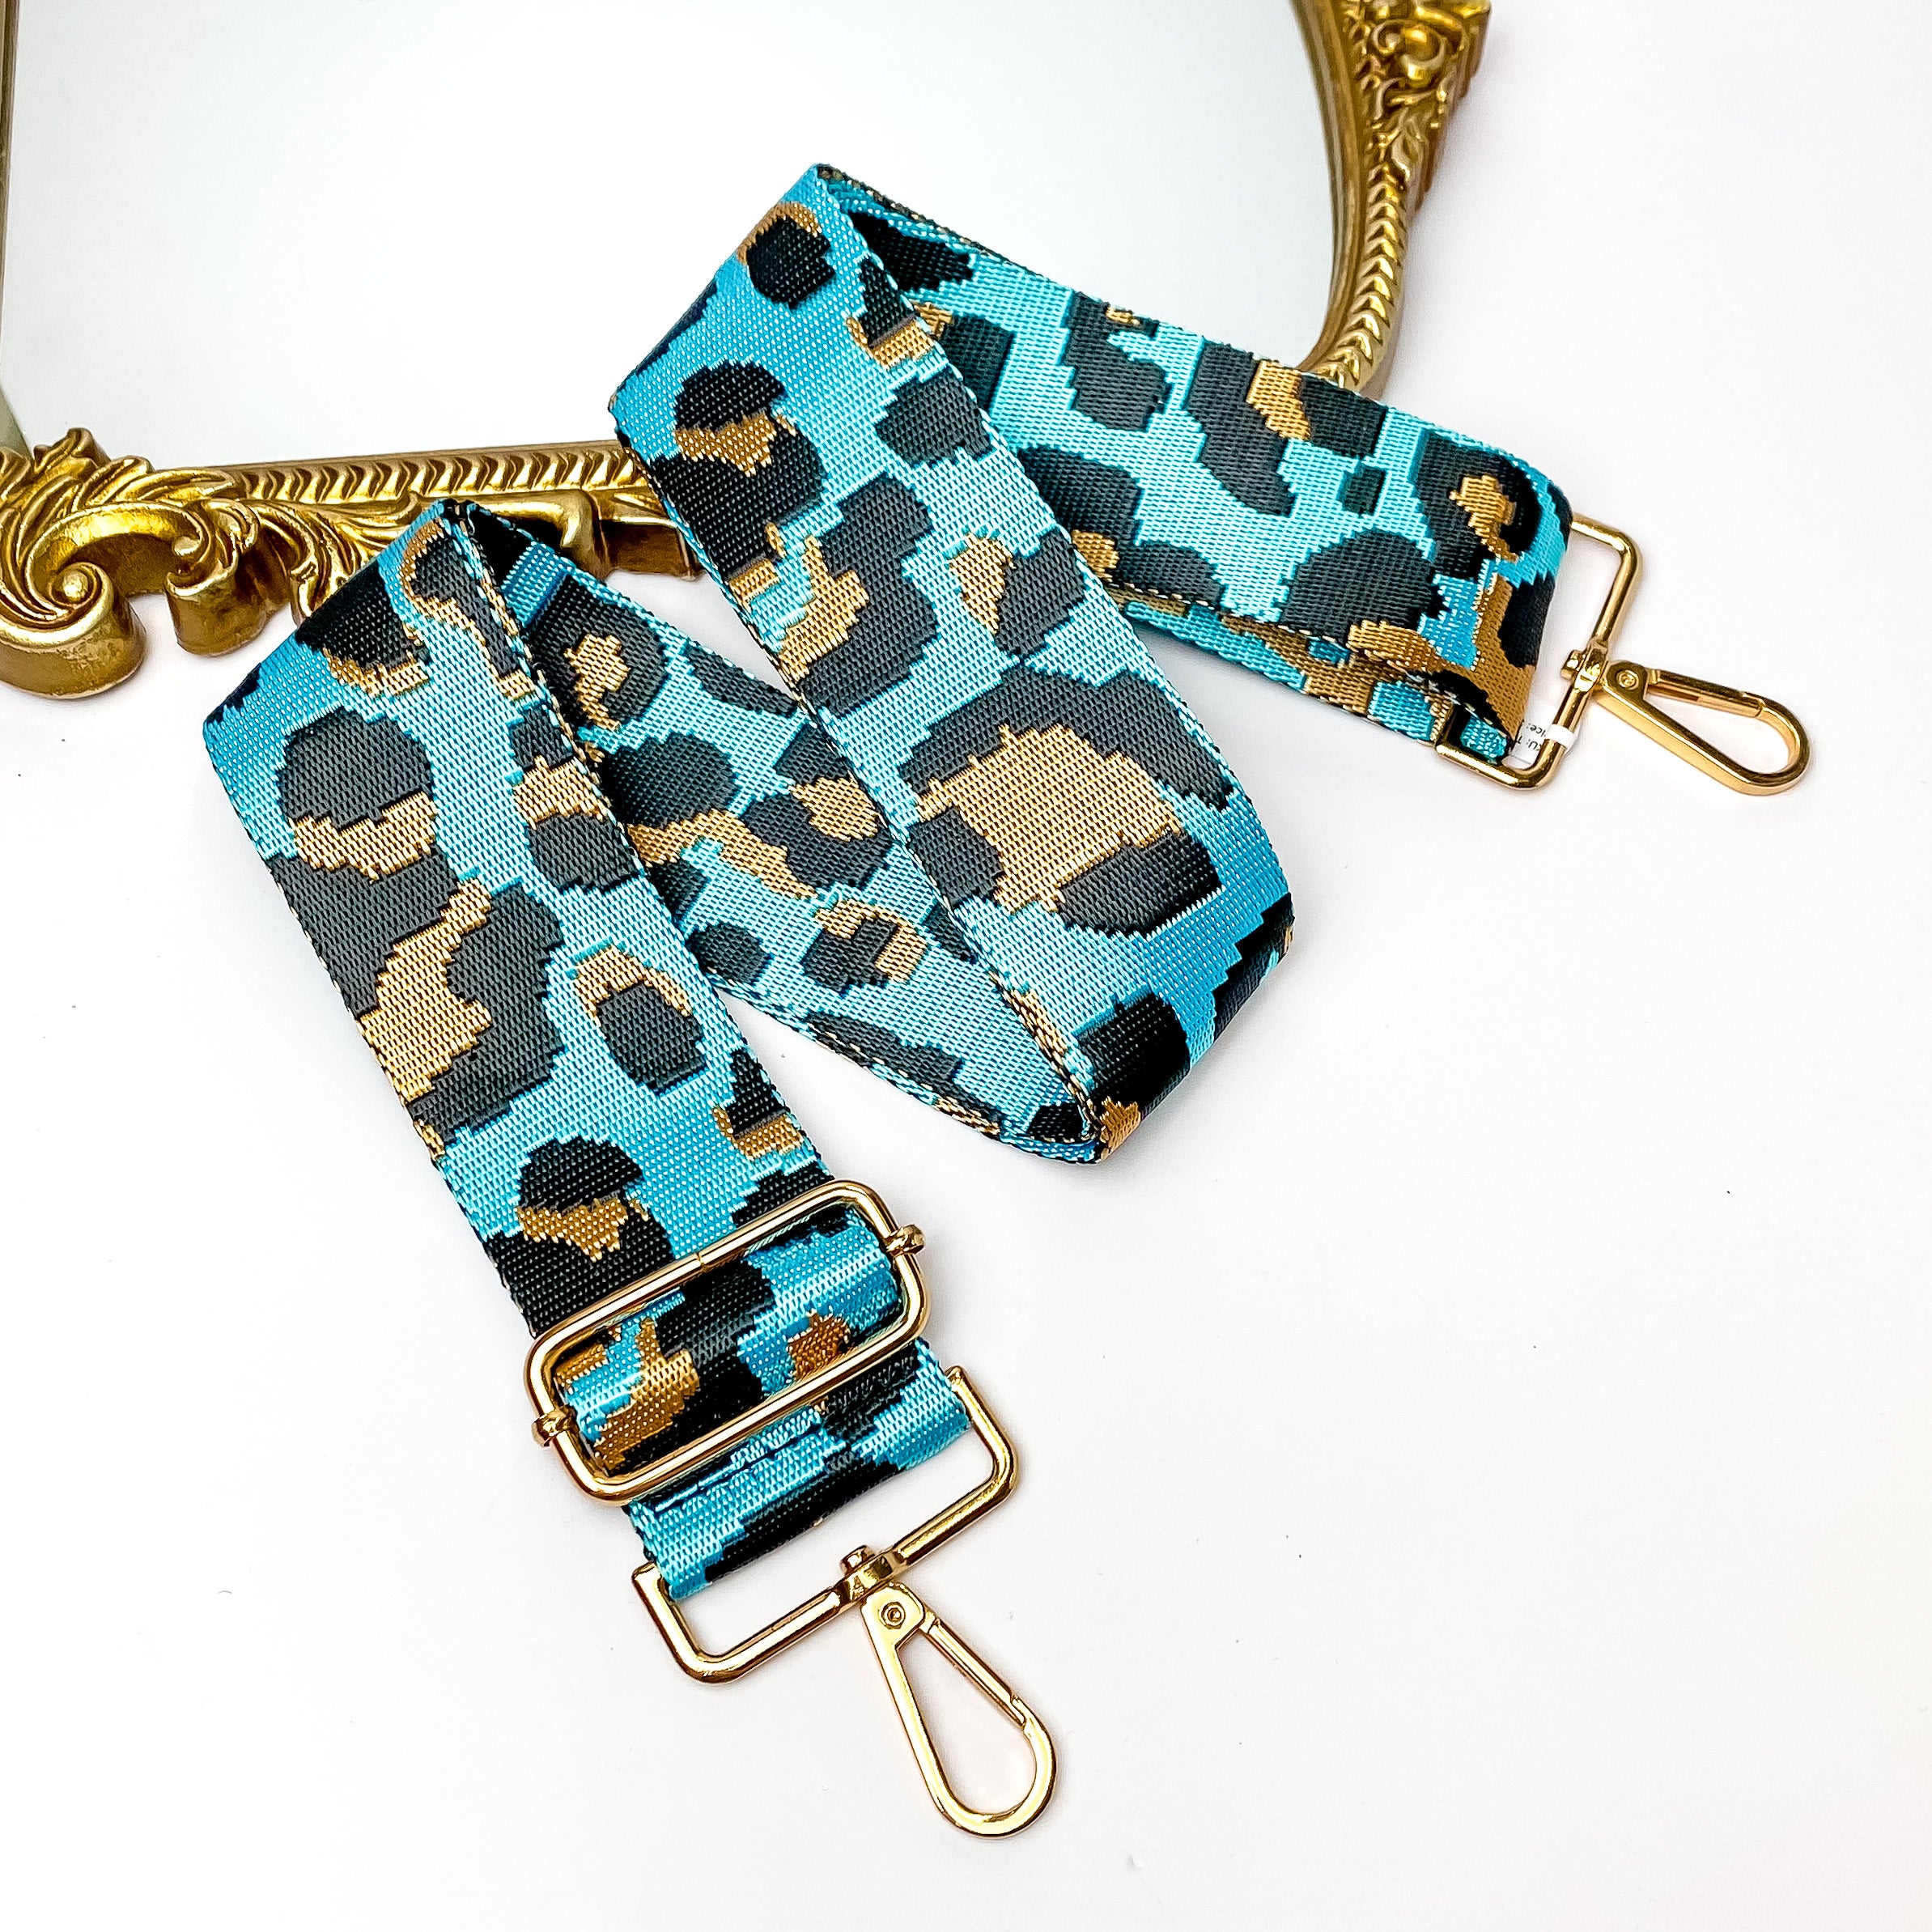 Shiny blue purse strap with a tan and black leopard print. This purse strap includes gold accents. This purse strap is pictured partially on a gold mirror on a white background.